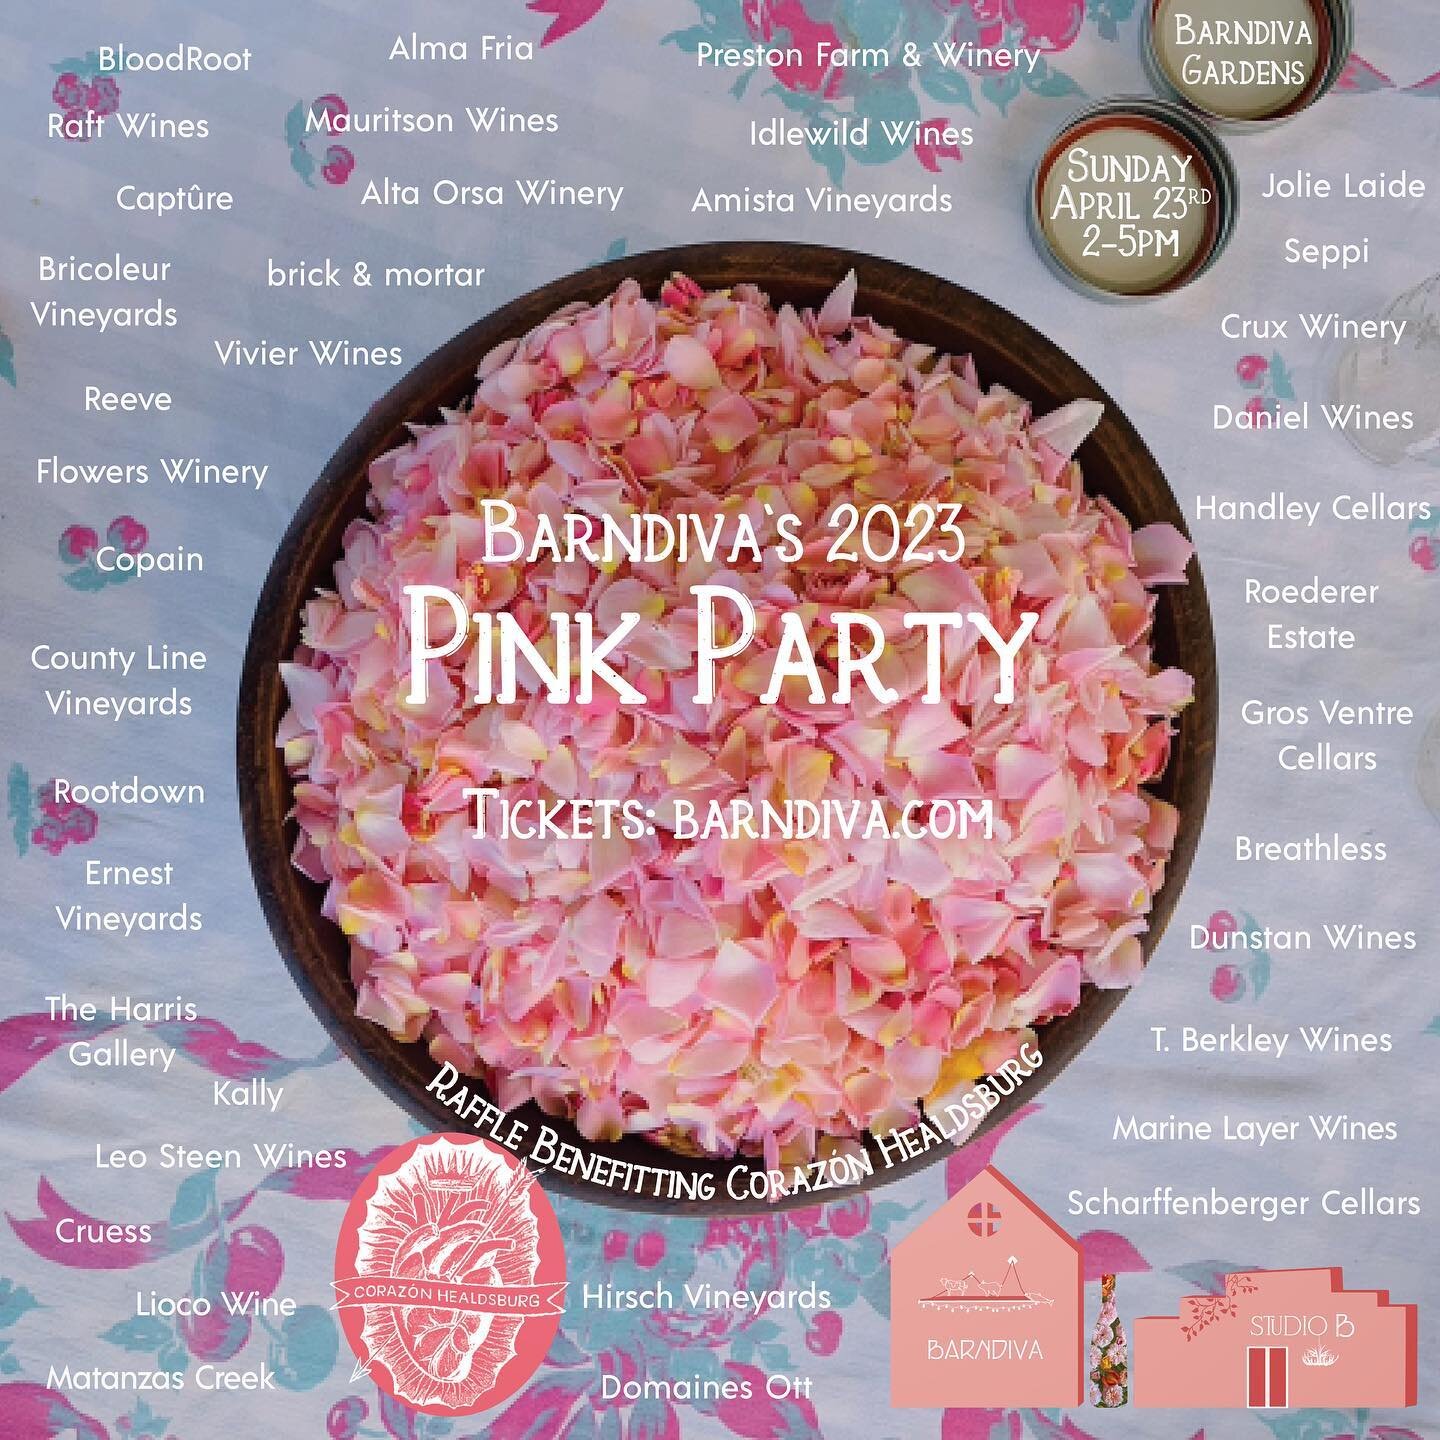 Celebrate Ros&eacute;, friendship, community and spring on April 23 when a remarkable group of Sonoma and Mendocino winemakers join us in the gardens for Barndiva&rsquo;s Pink Party 2023!

There will be music, Barn Bites from Erik Anderson&rsquo;s ki